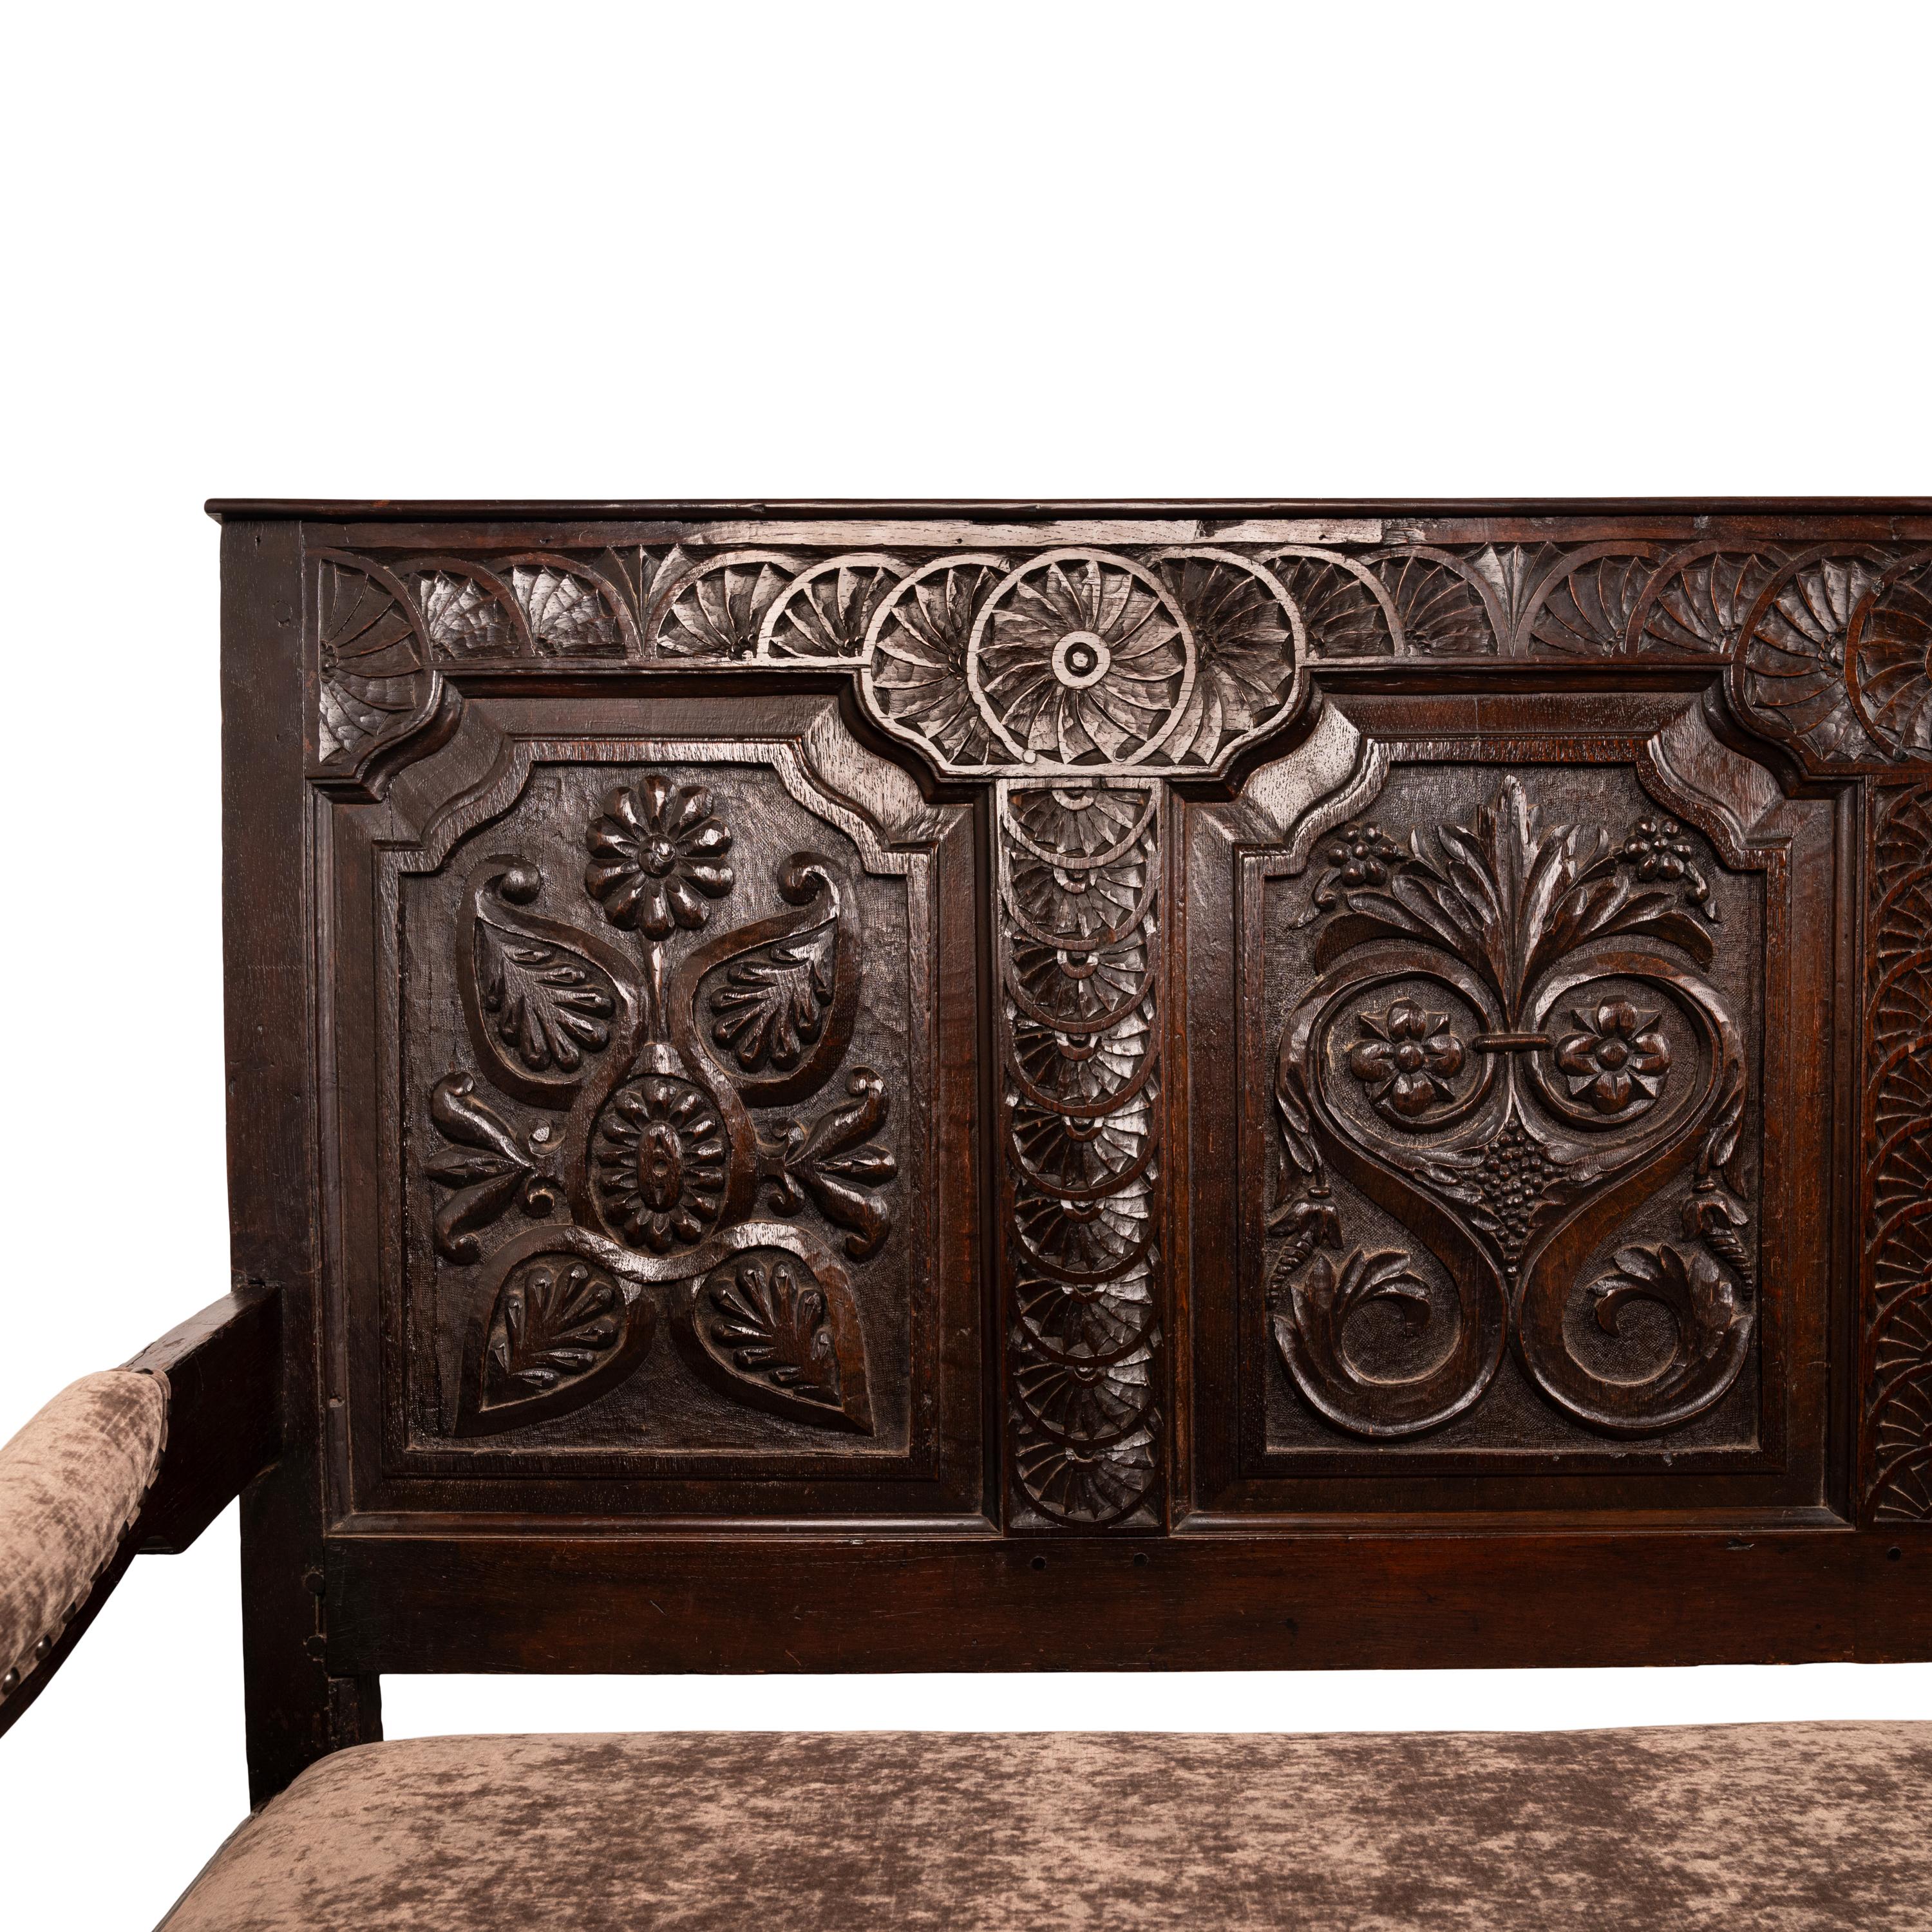 Antique English 17th Century King Charles II Carved Oak Settle Sofa Bench 1680 For Sale 5